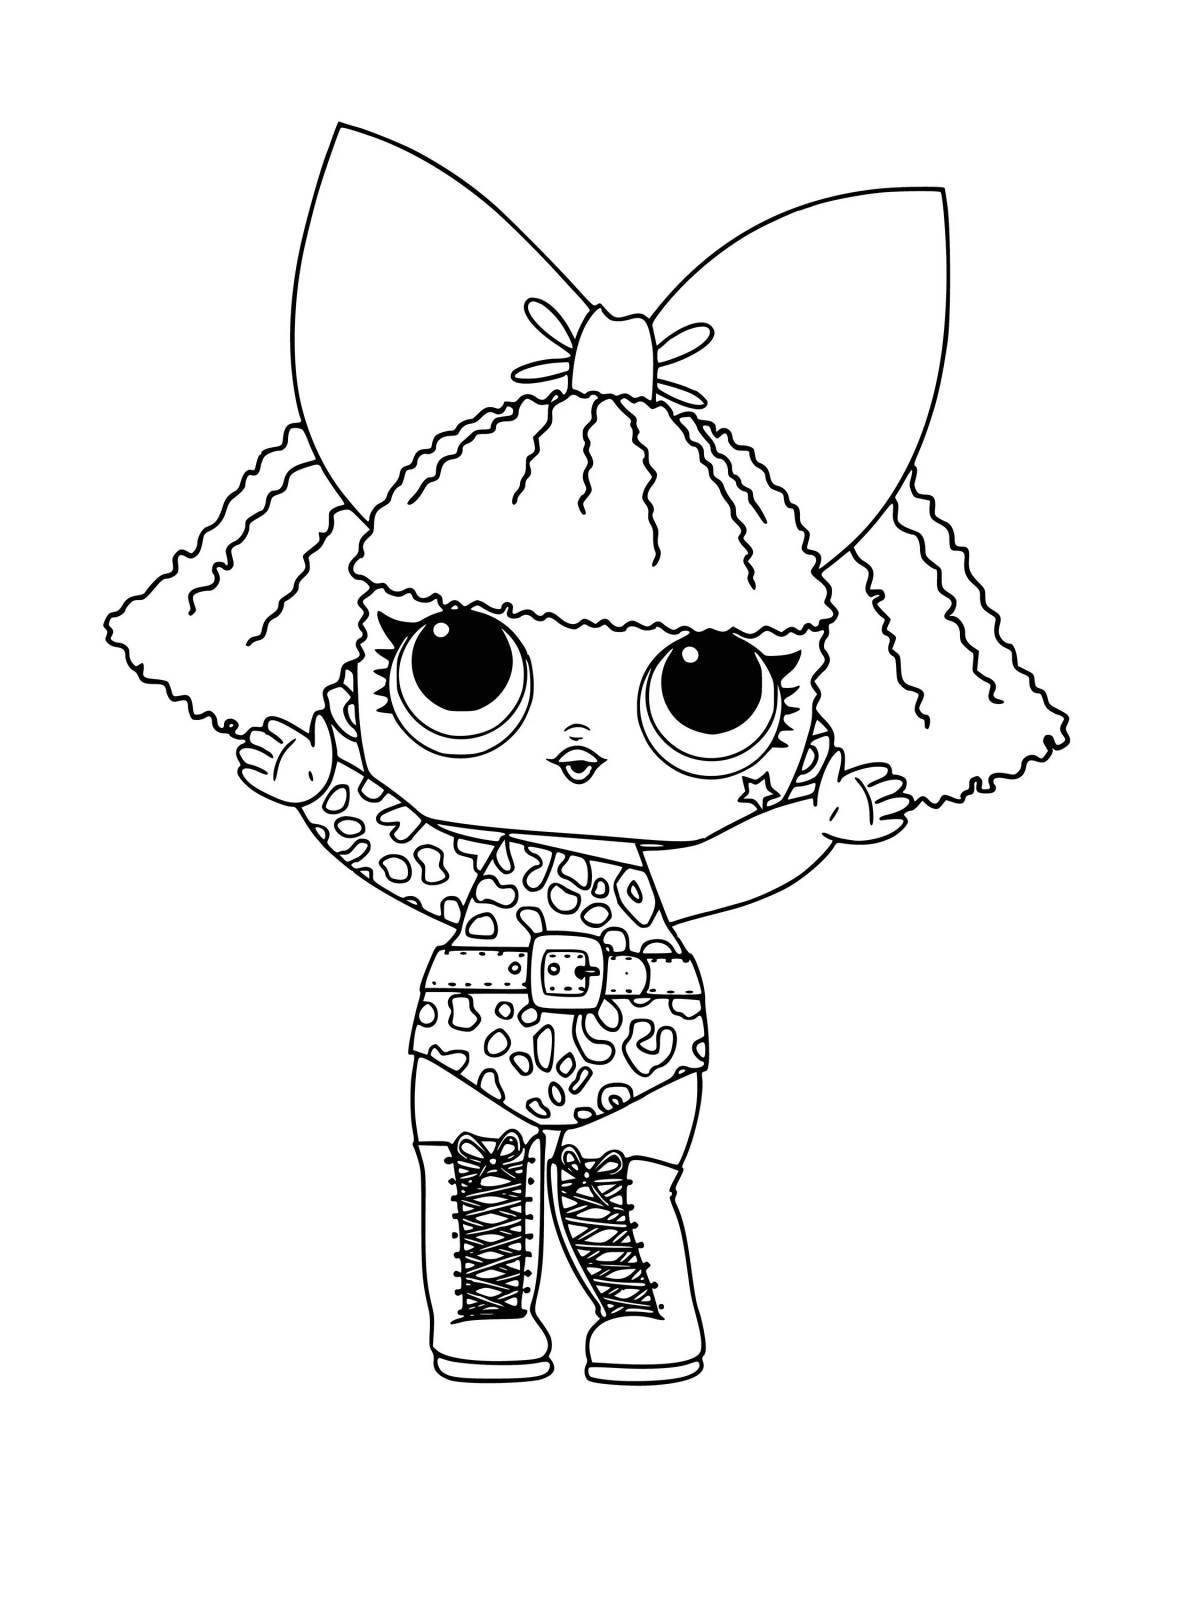 Jovial bee doll lol coloring page